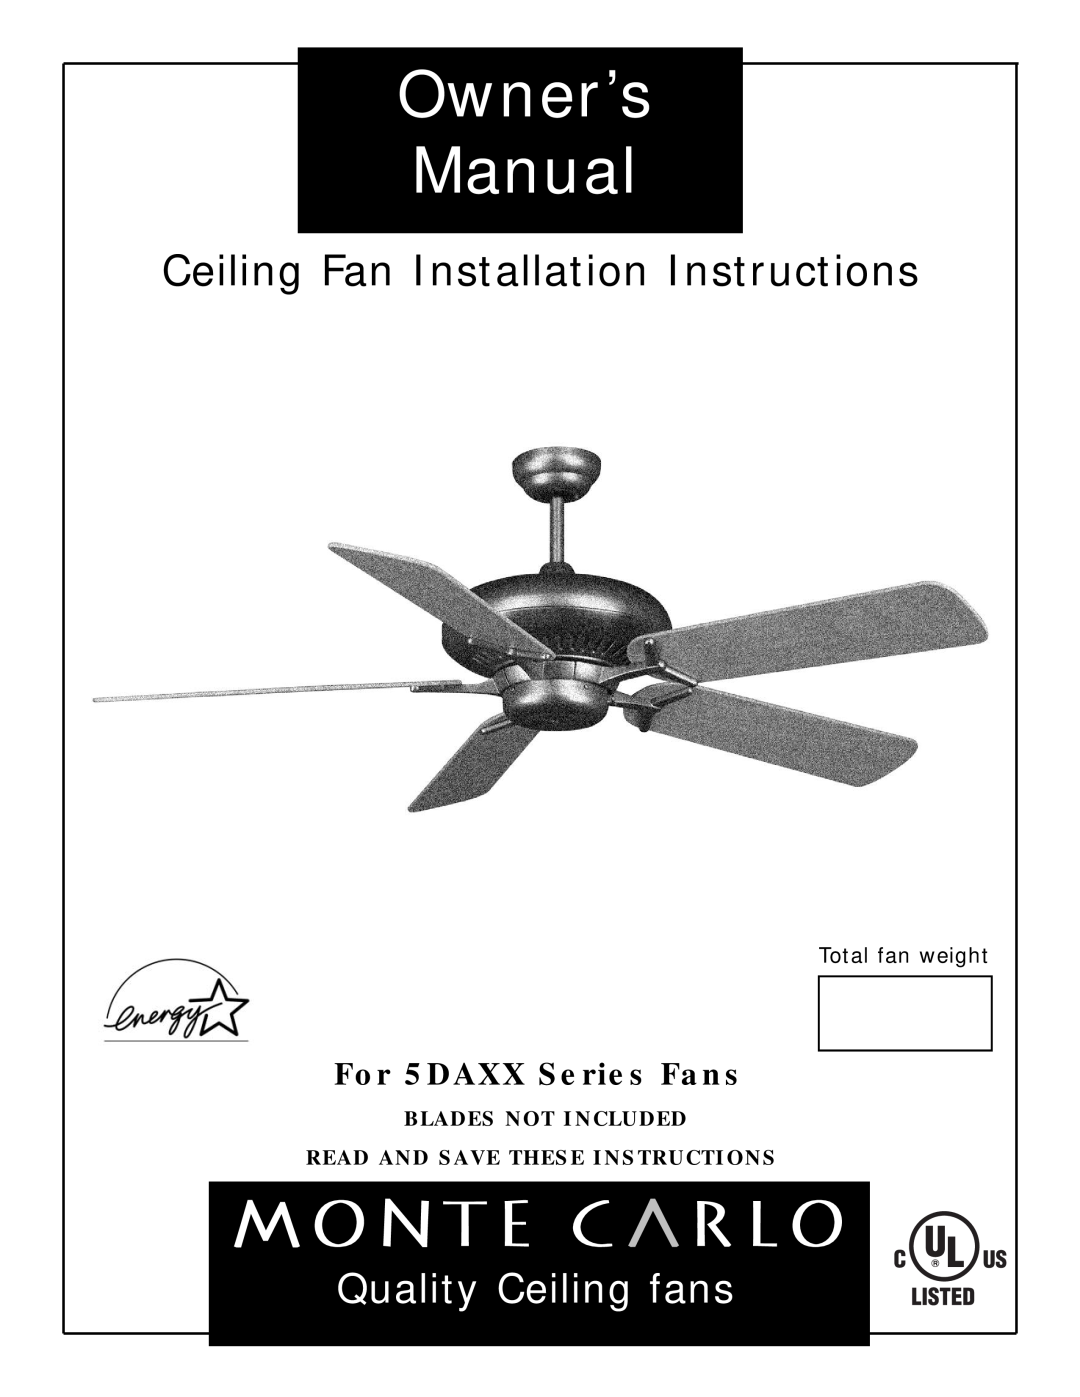 Monte Carlo Fan Company 5DAXX owner manual Blades Not Included, Read And Save These Instructions, Quality Ceiling fans 